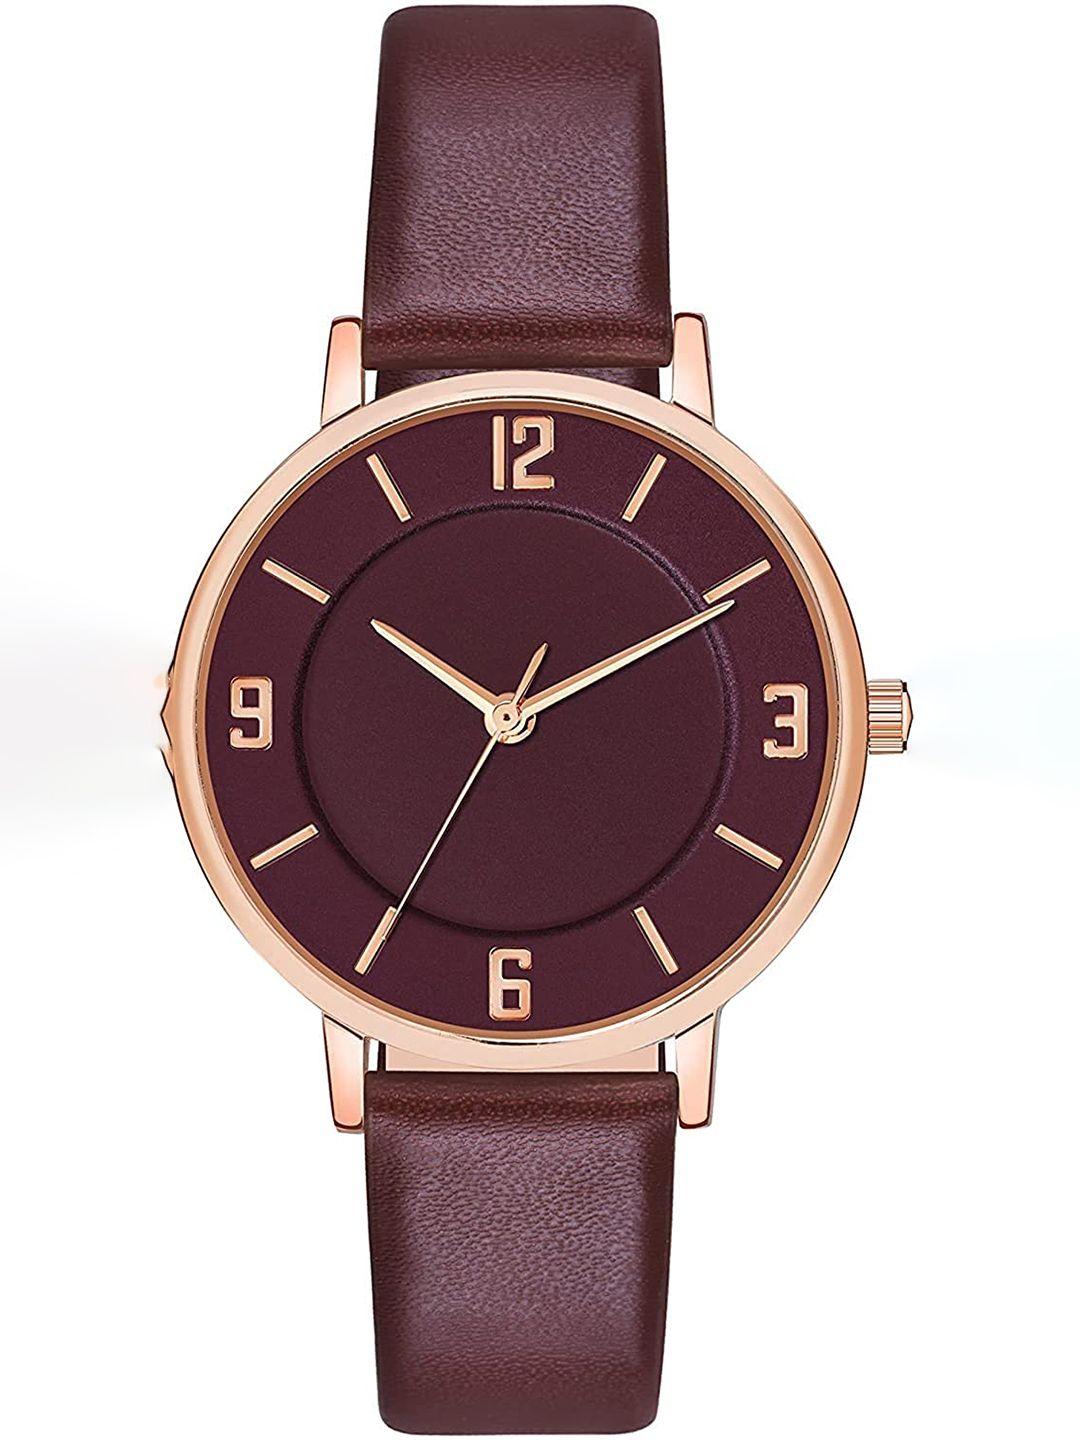 shocknshop-women-maroon-dial-&-neon-red-leather-straps-analogue-watch